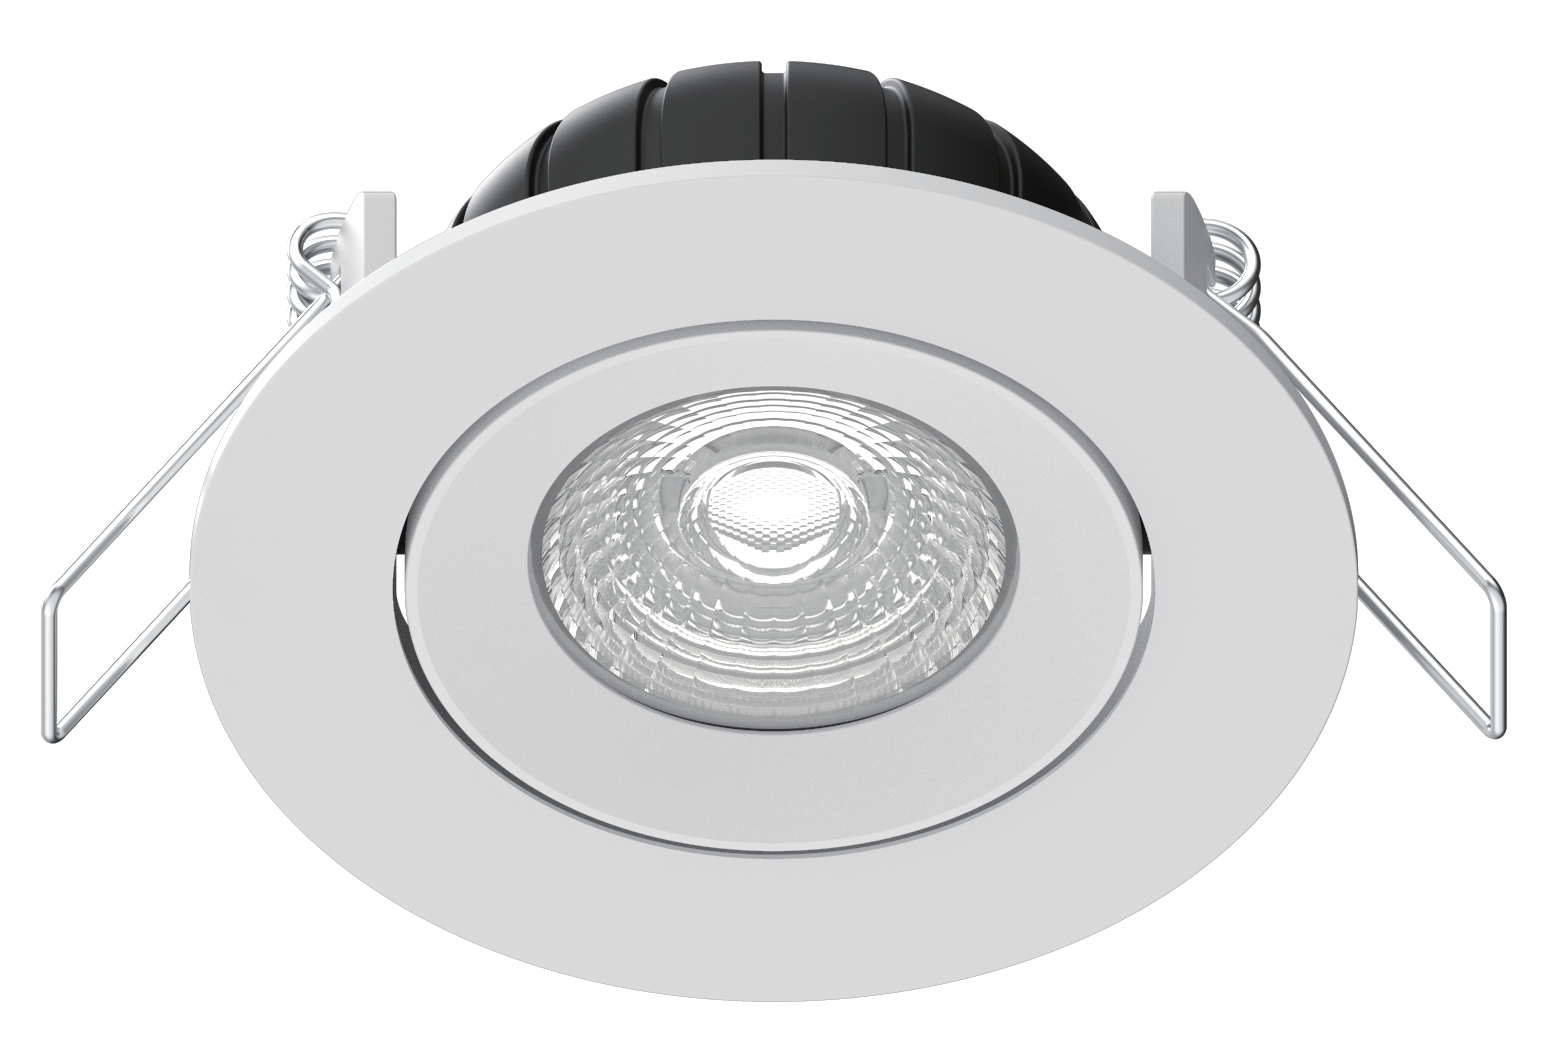 7W Adjustable Led downlight IP20 anoloana 3CCT switchable